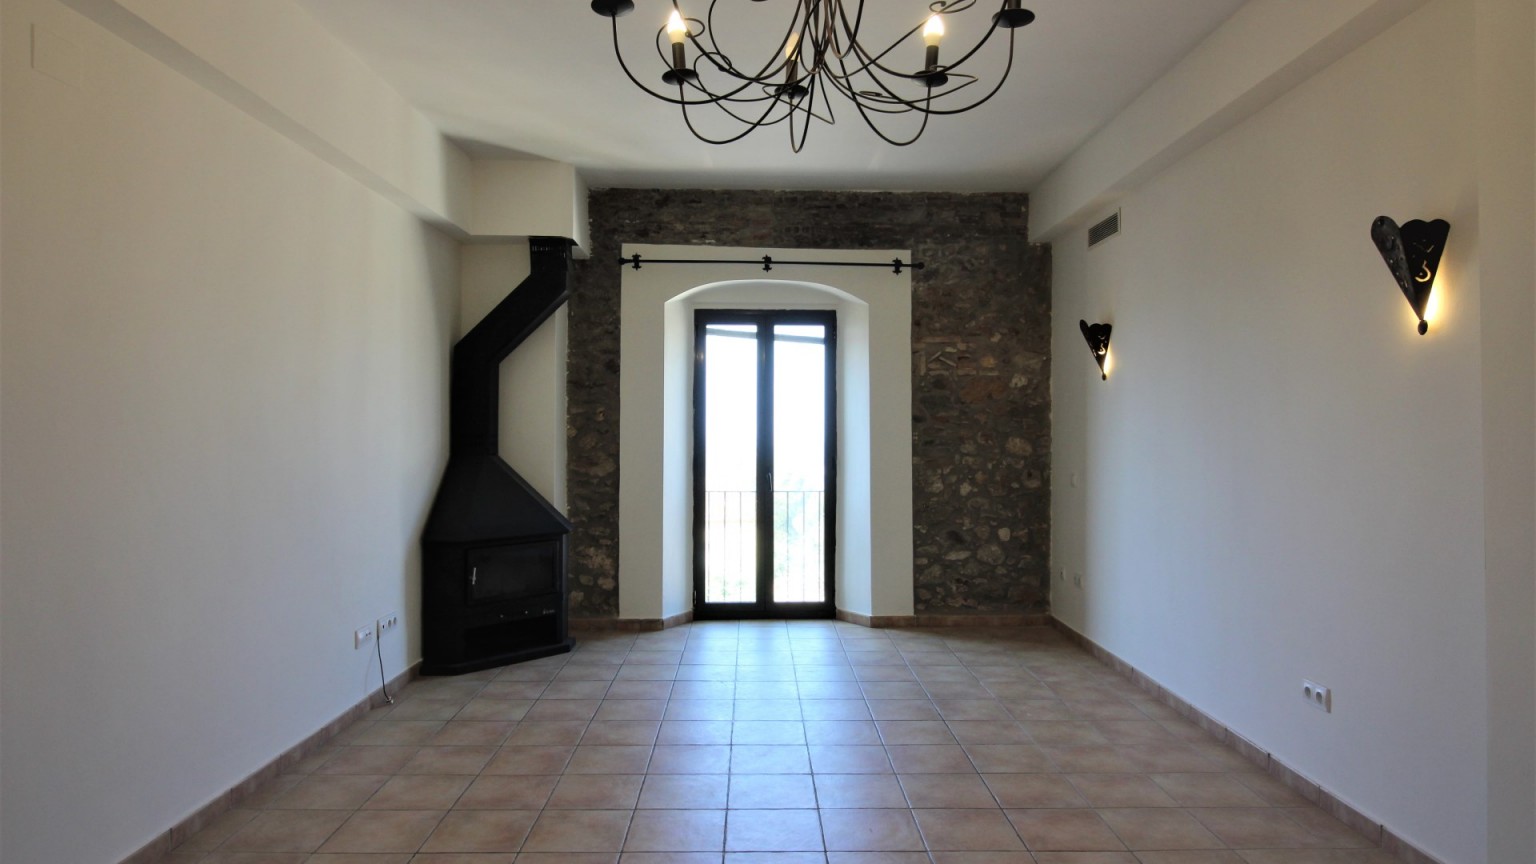 Duplex for sale,  with two bedrooms and terrace with views, in Palau Saverdera.